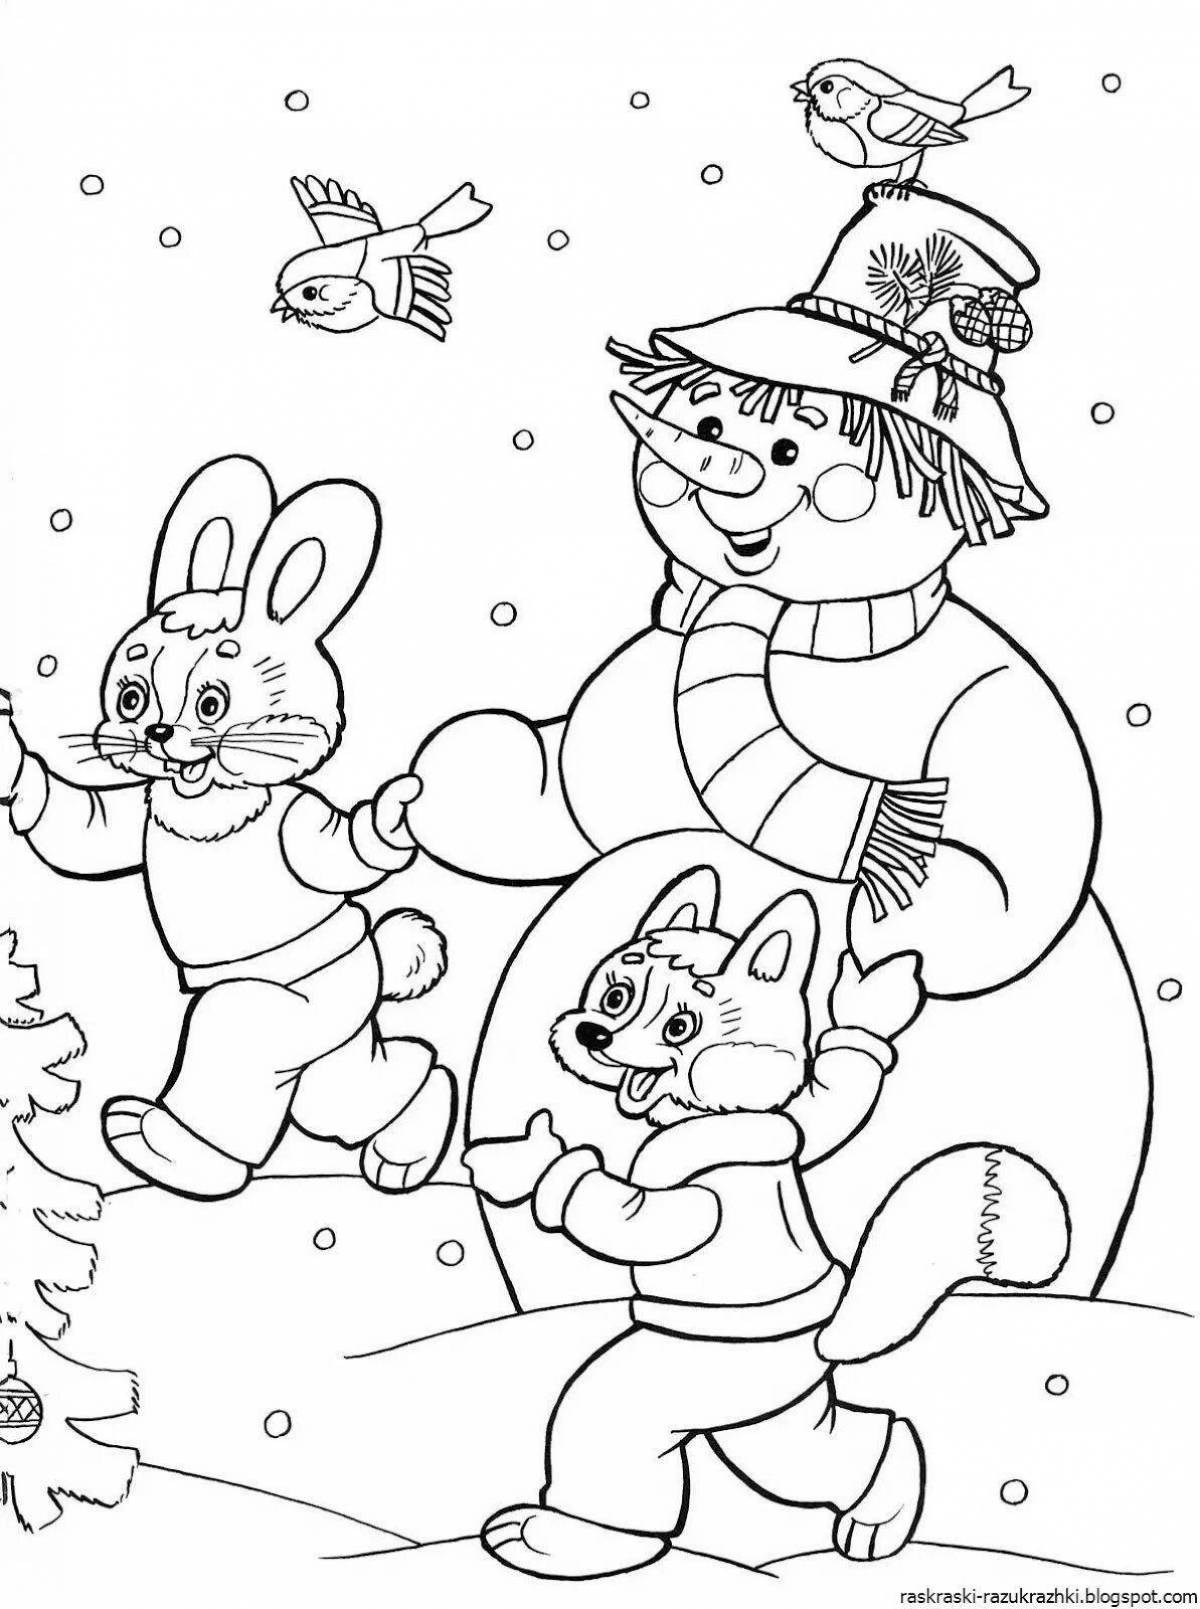 Coloring animals in winter